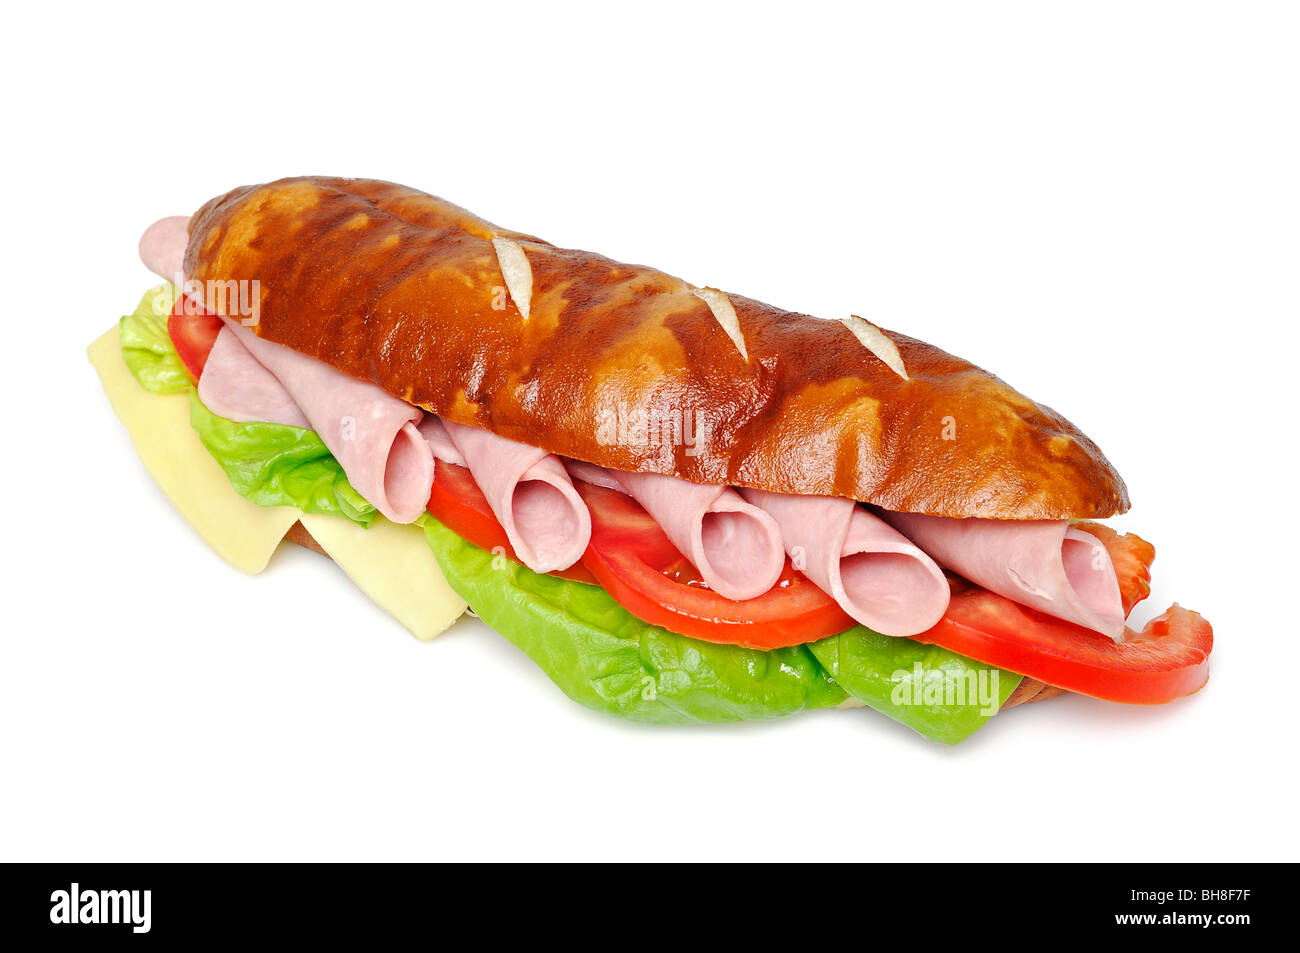 Baguette with Cheese and Ham Stock Photo